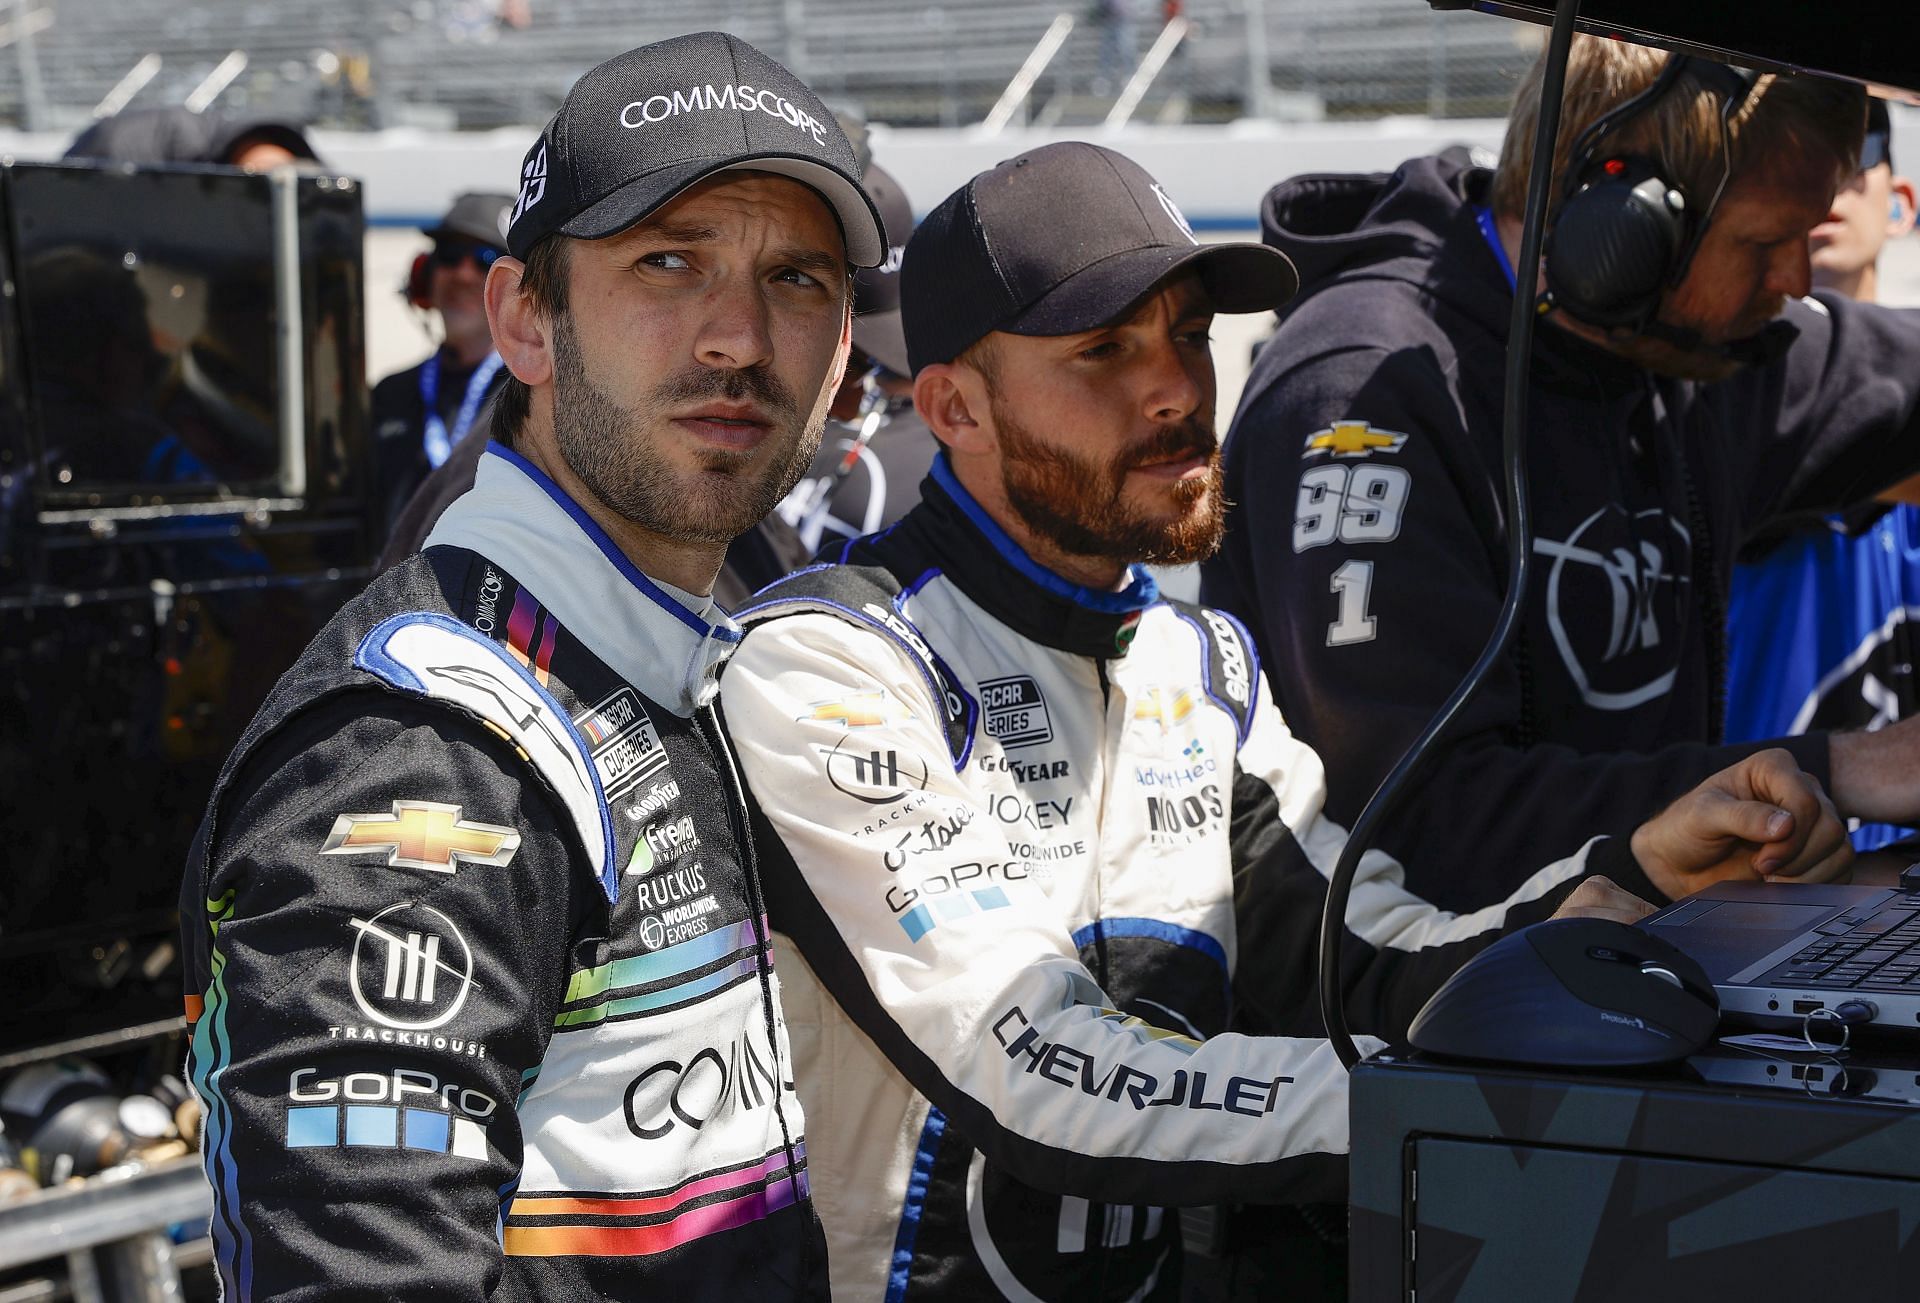 Daniel Suarez (L) and Ross Chastain (R) wait on the grid during qualifying for the DuraMAX Drydene 400 presented by RelaDyne at Dover Motor Speedway